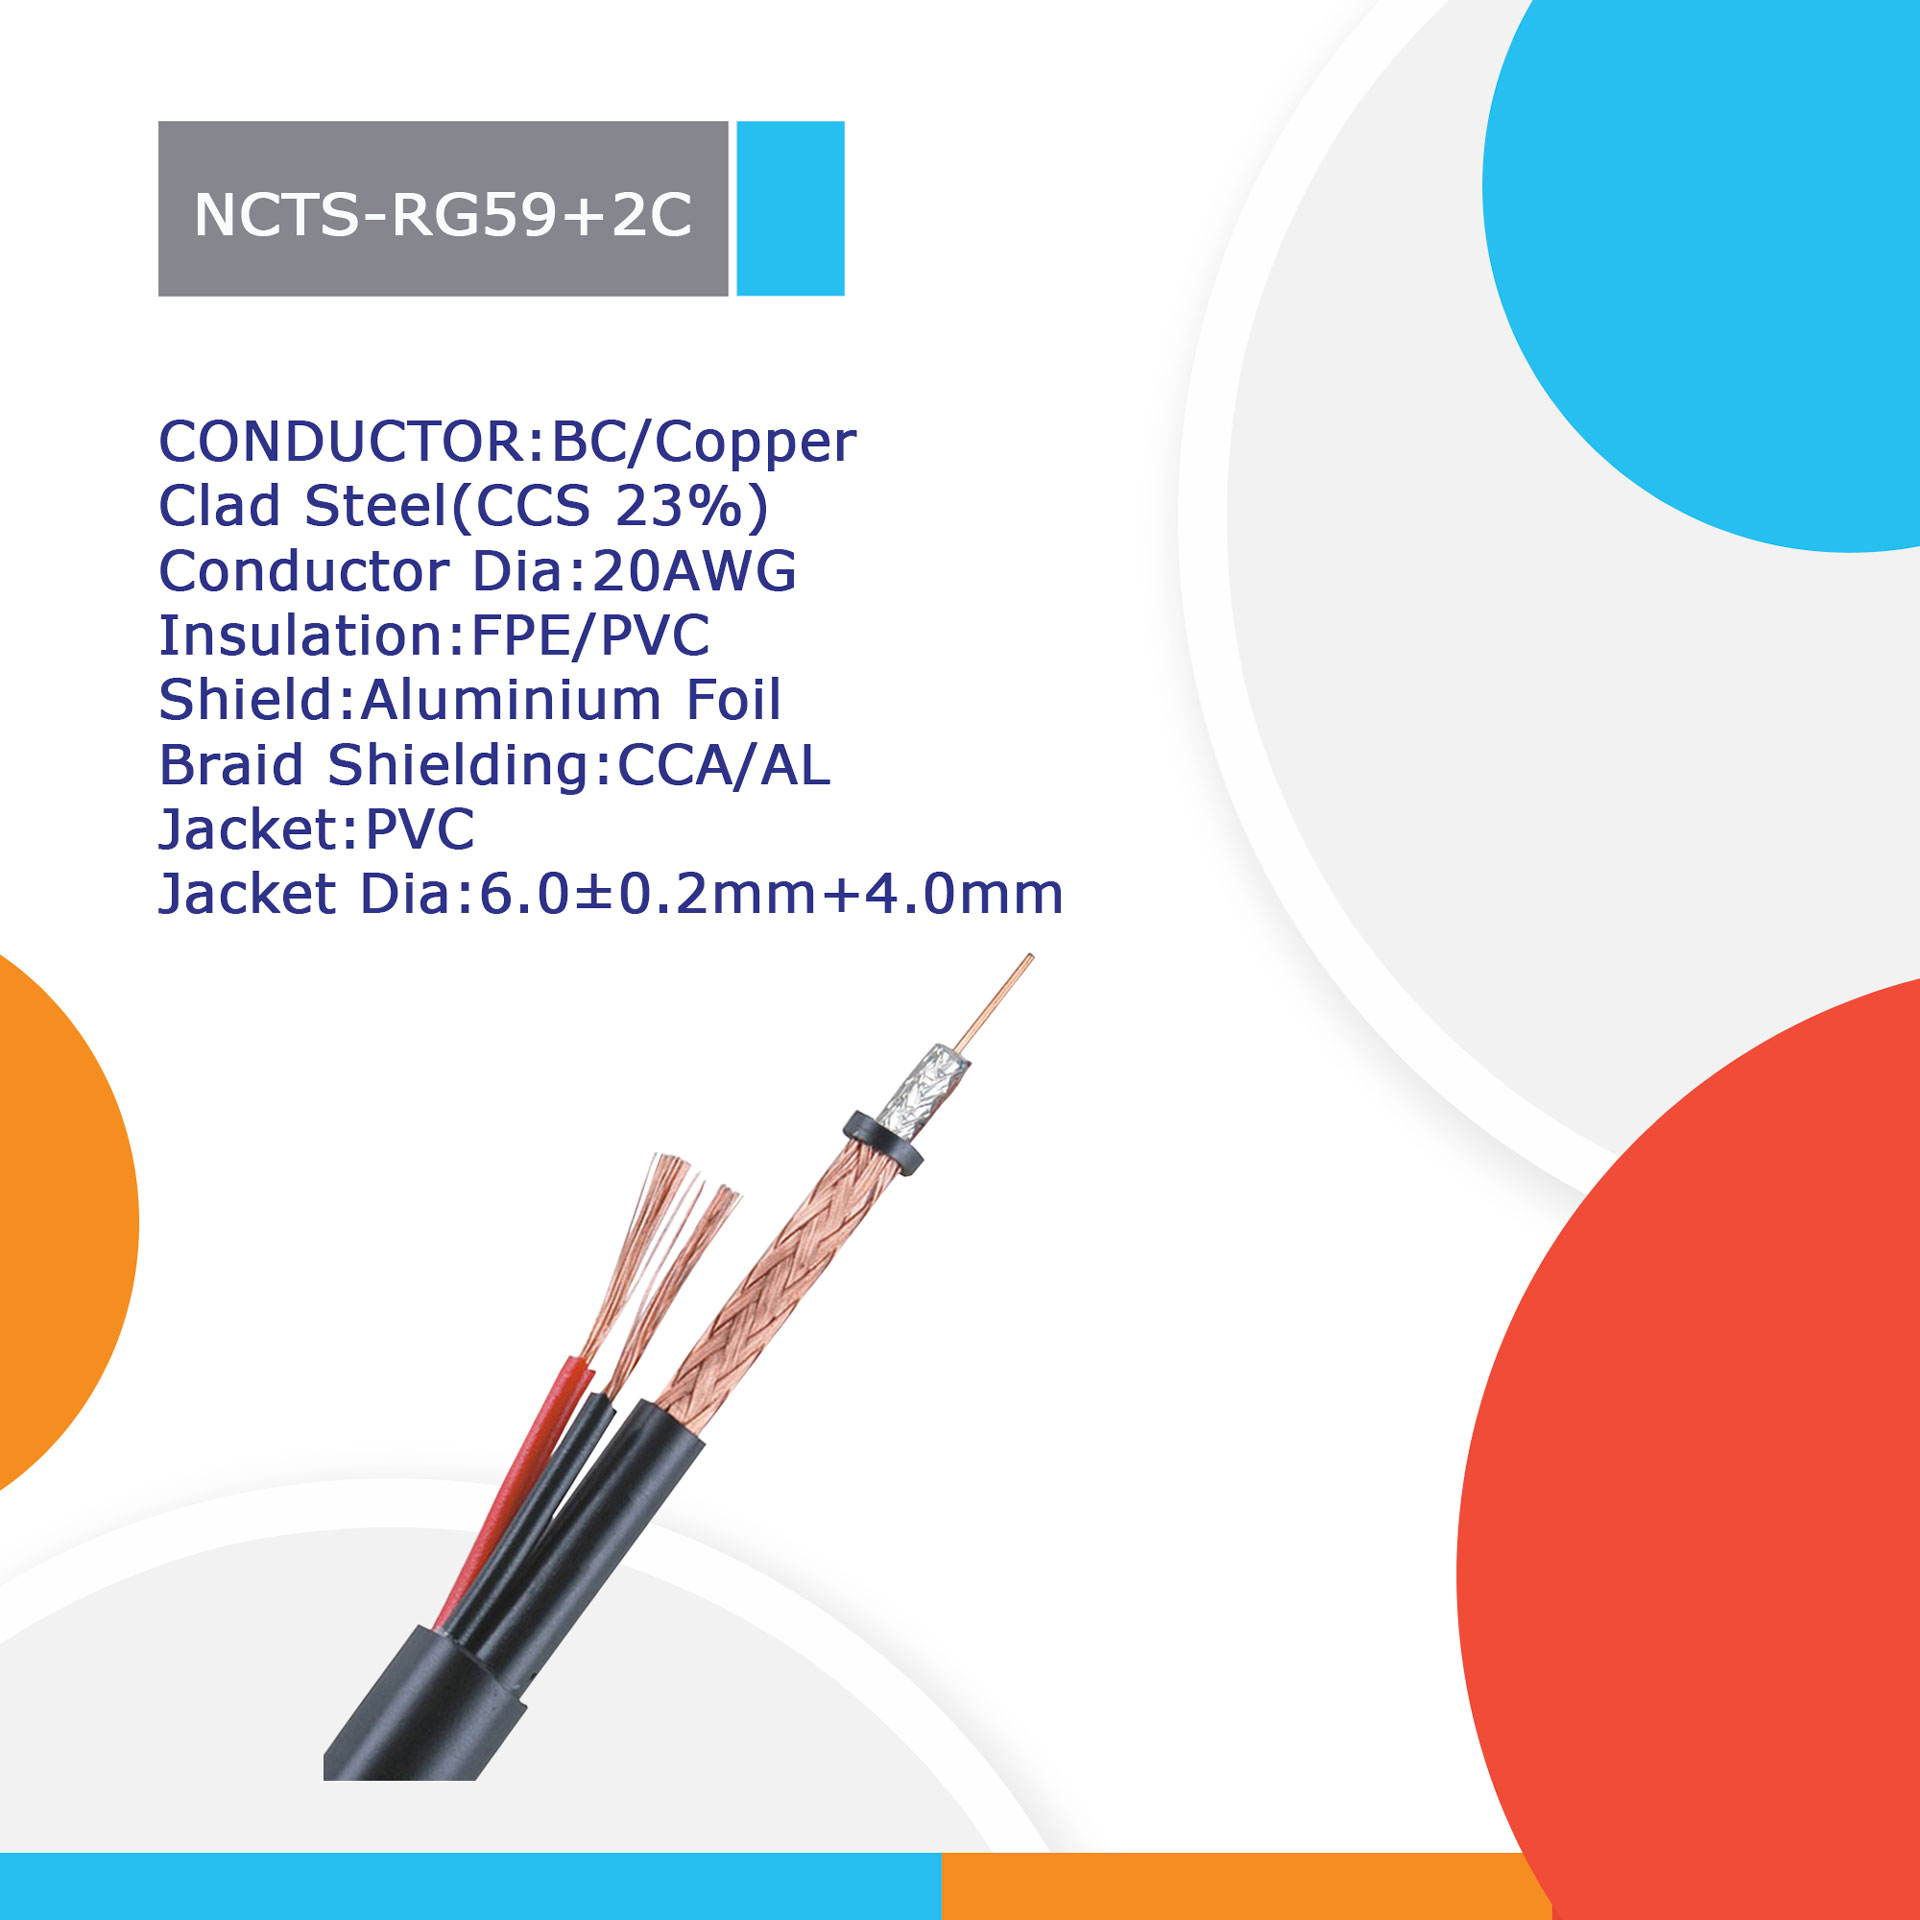 NCTS-RG59+2C